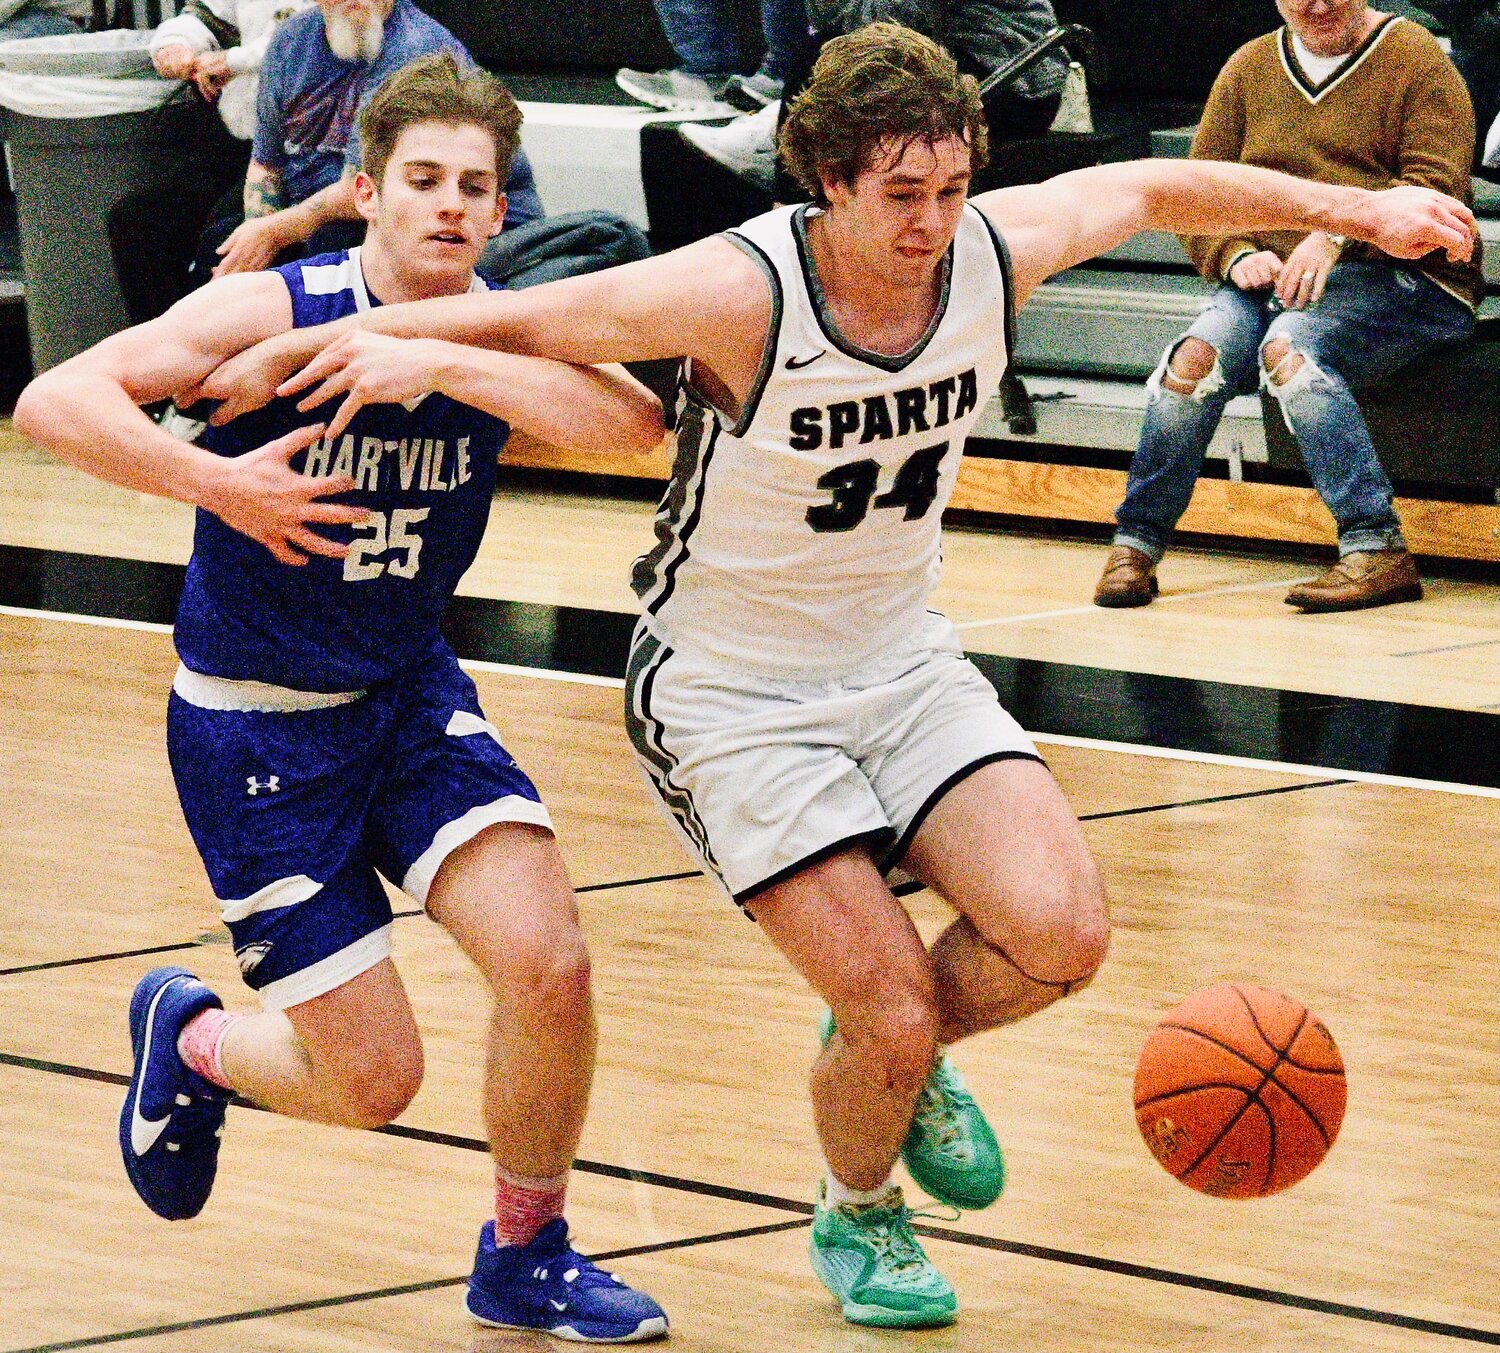 SPARTA'S JAKE LAFFERTY gives chase to a loose ball.